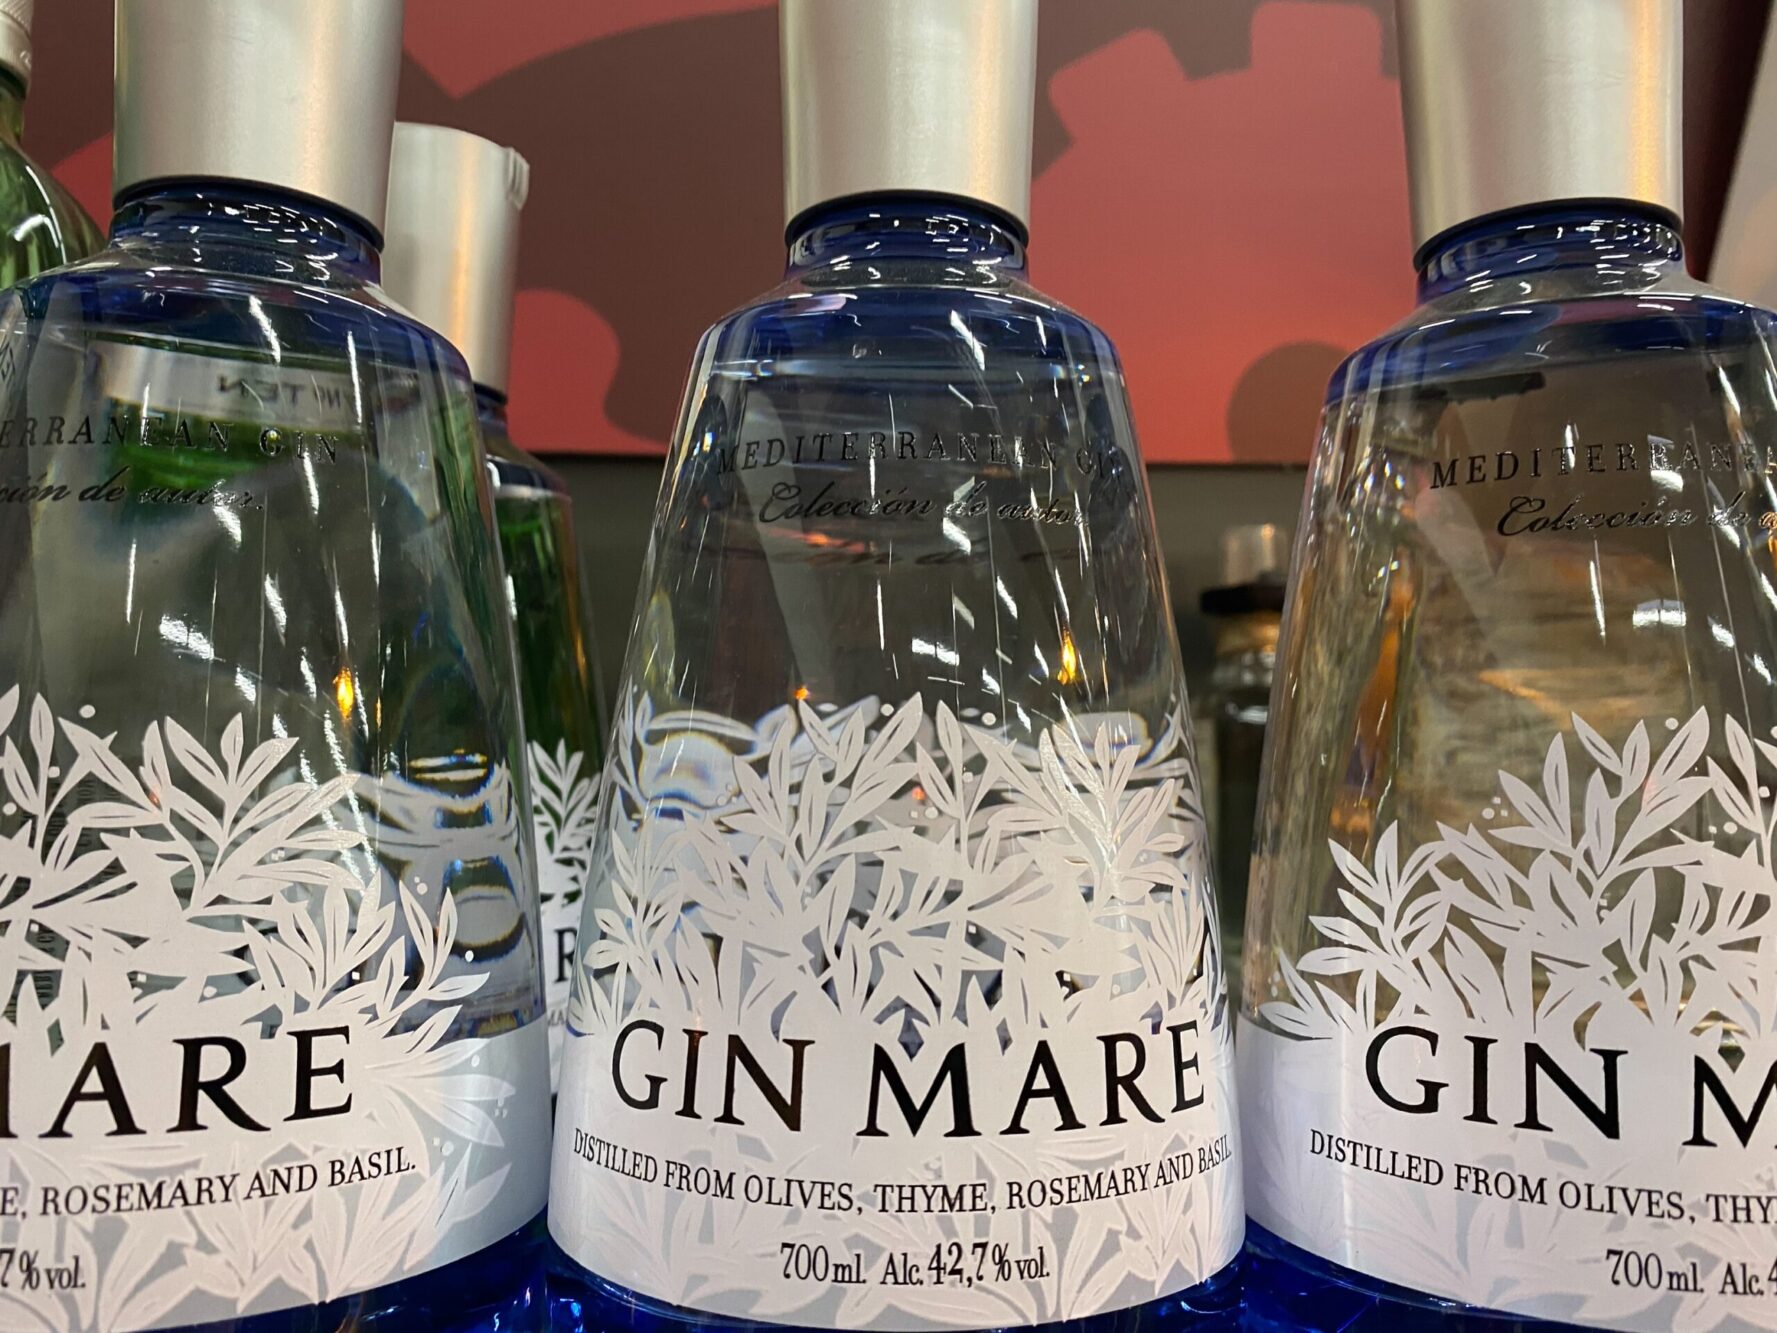 Brown-Forman reaches for gin brand Gin - Just Drinks Mare